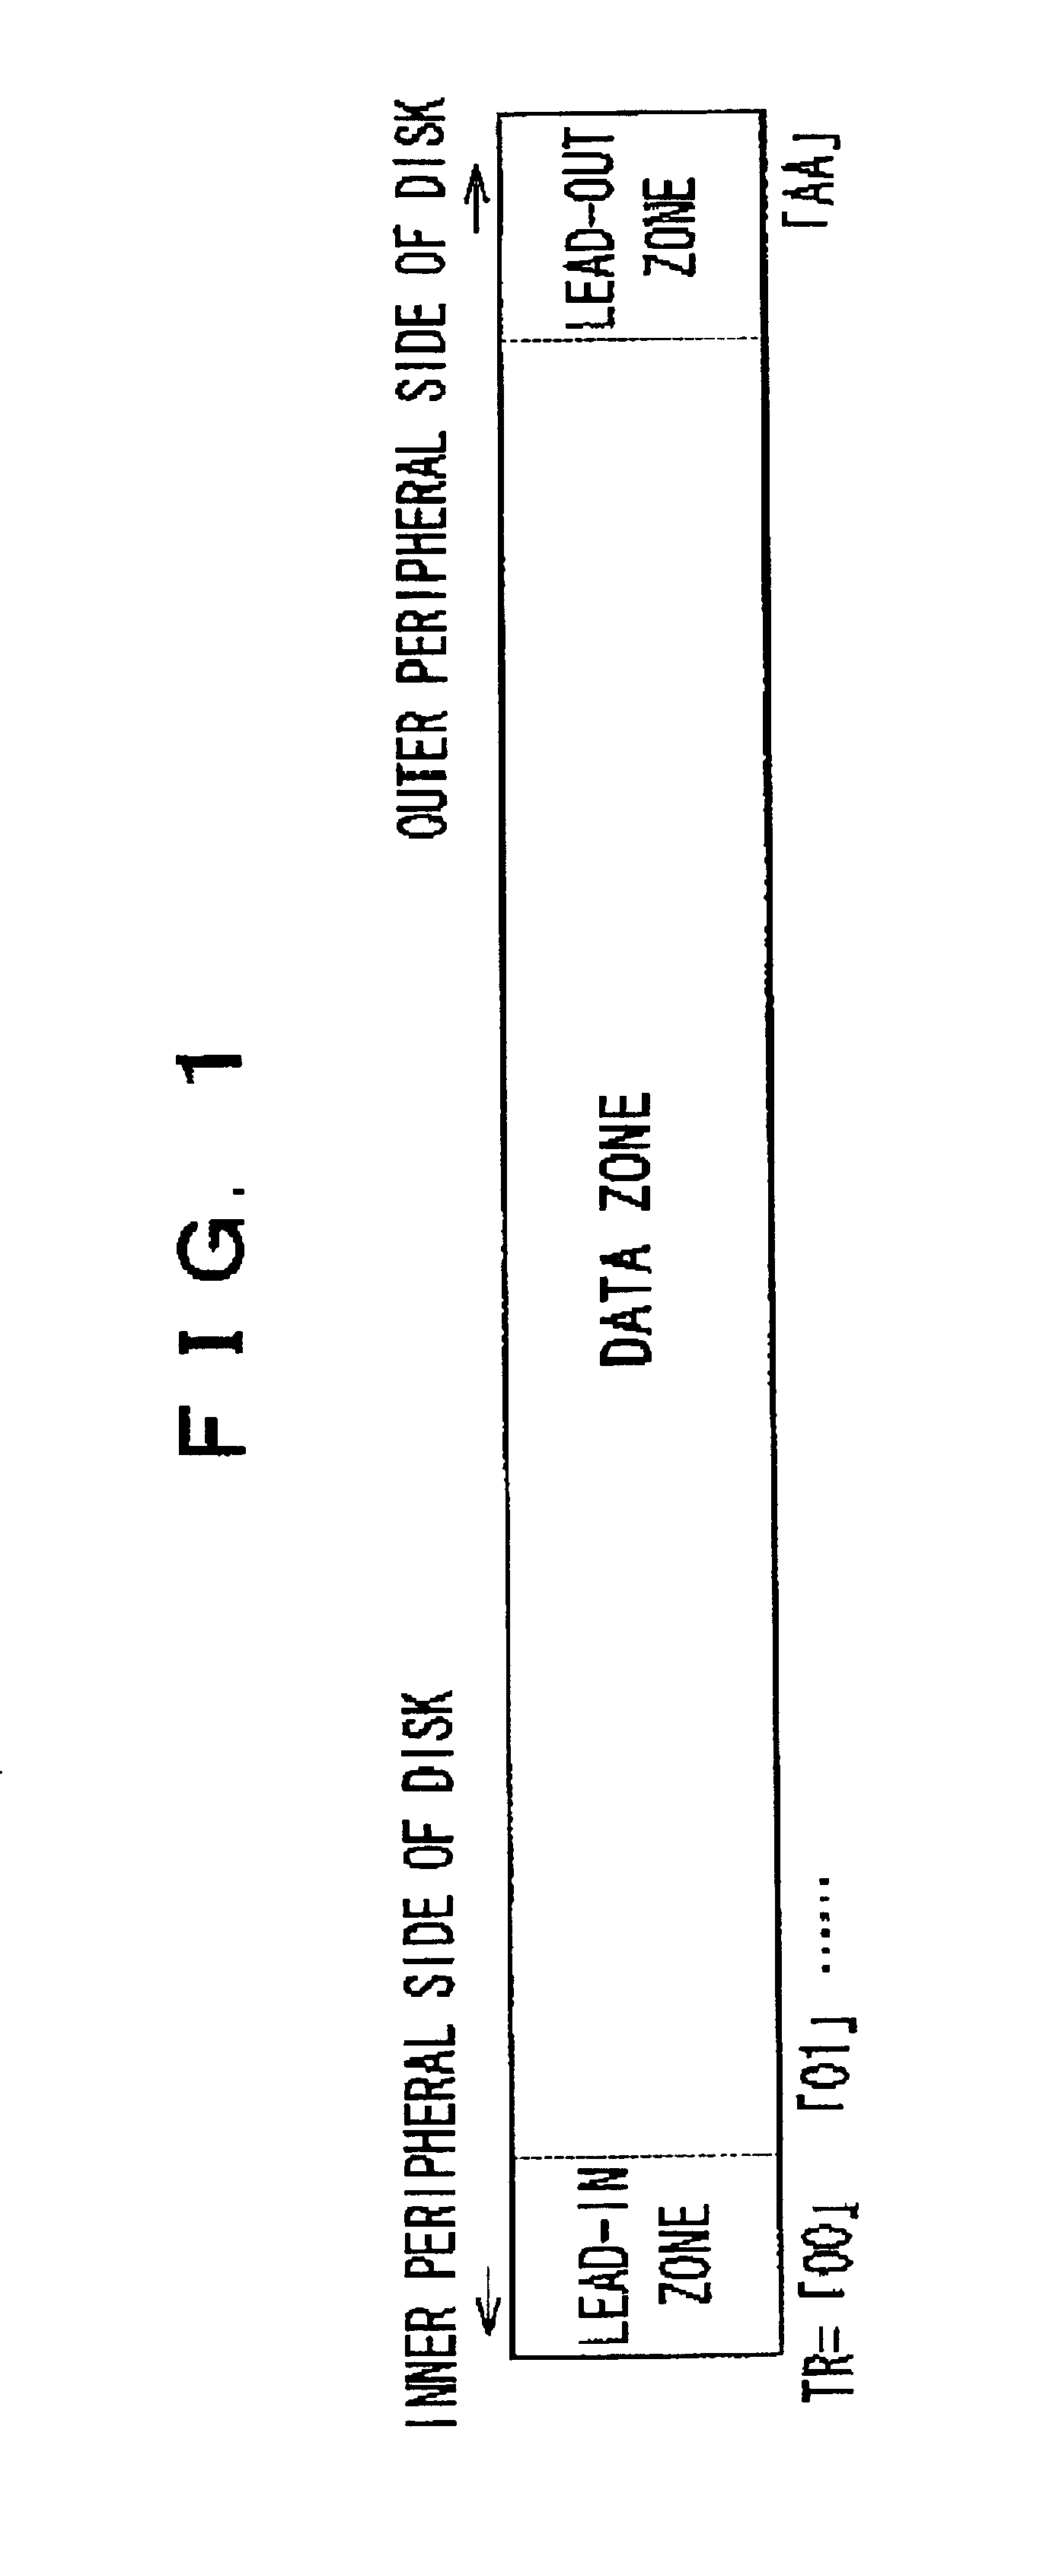 Optically recorded data discrimination apparatus and associated methodology